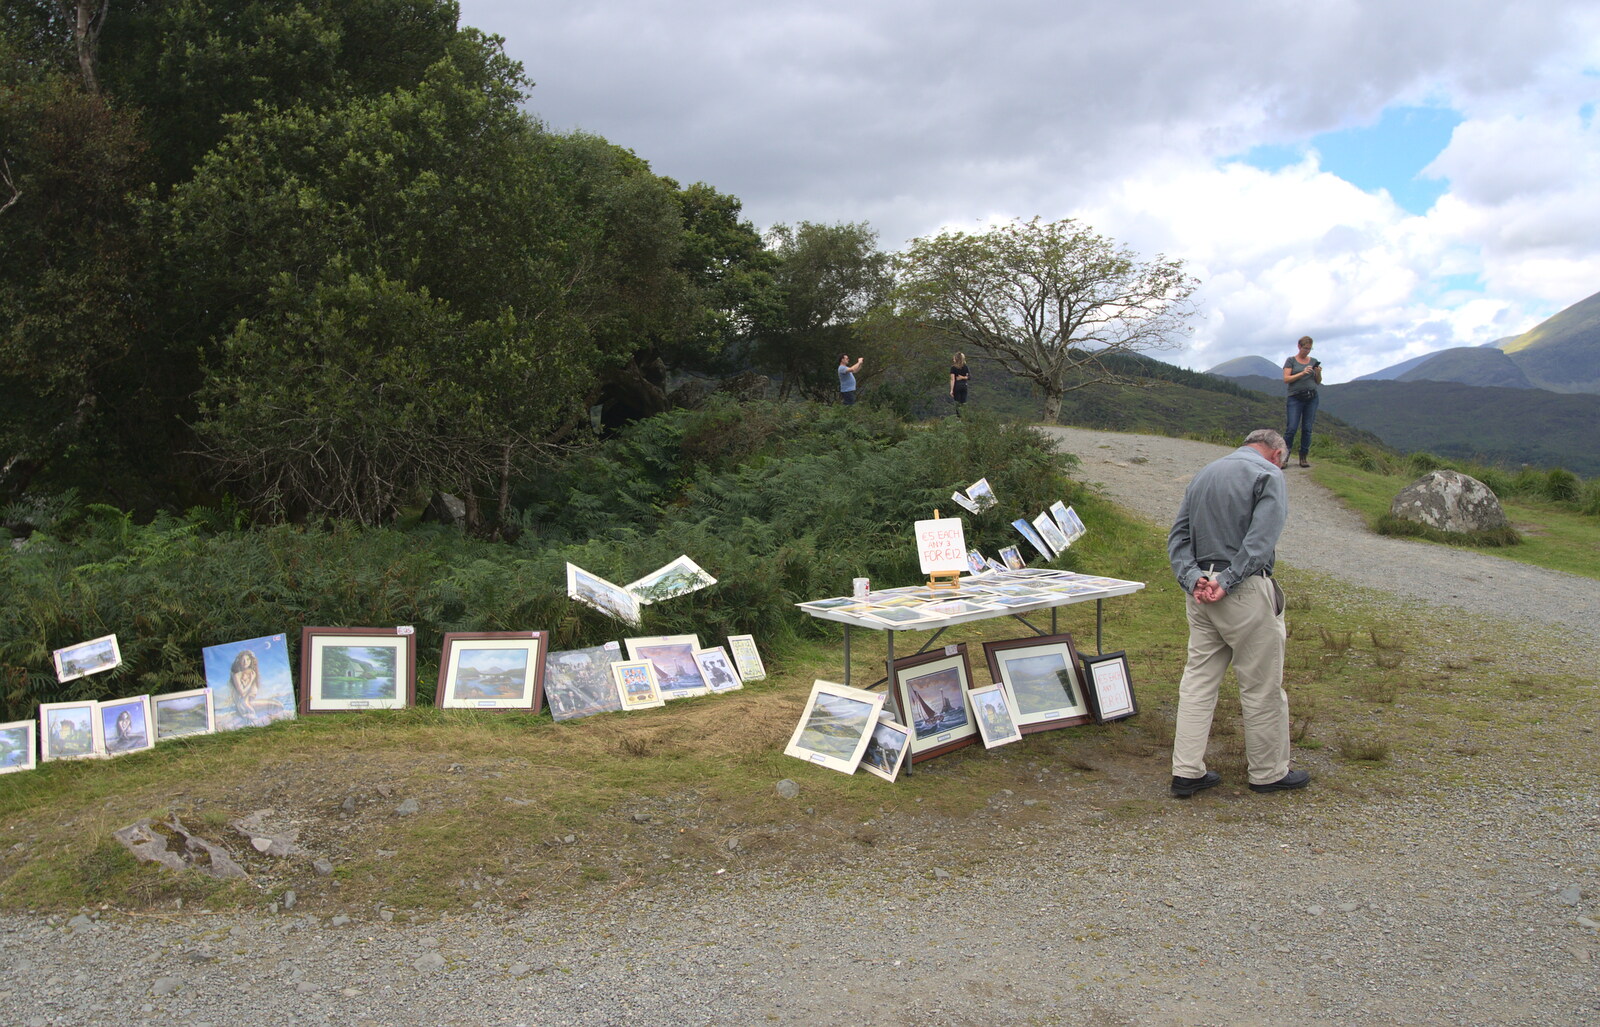 An old dude sells pictures by the path from The Annascaul 10k Run, Abha na Scáil, Kerry, Ireland - 5th August 2017